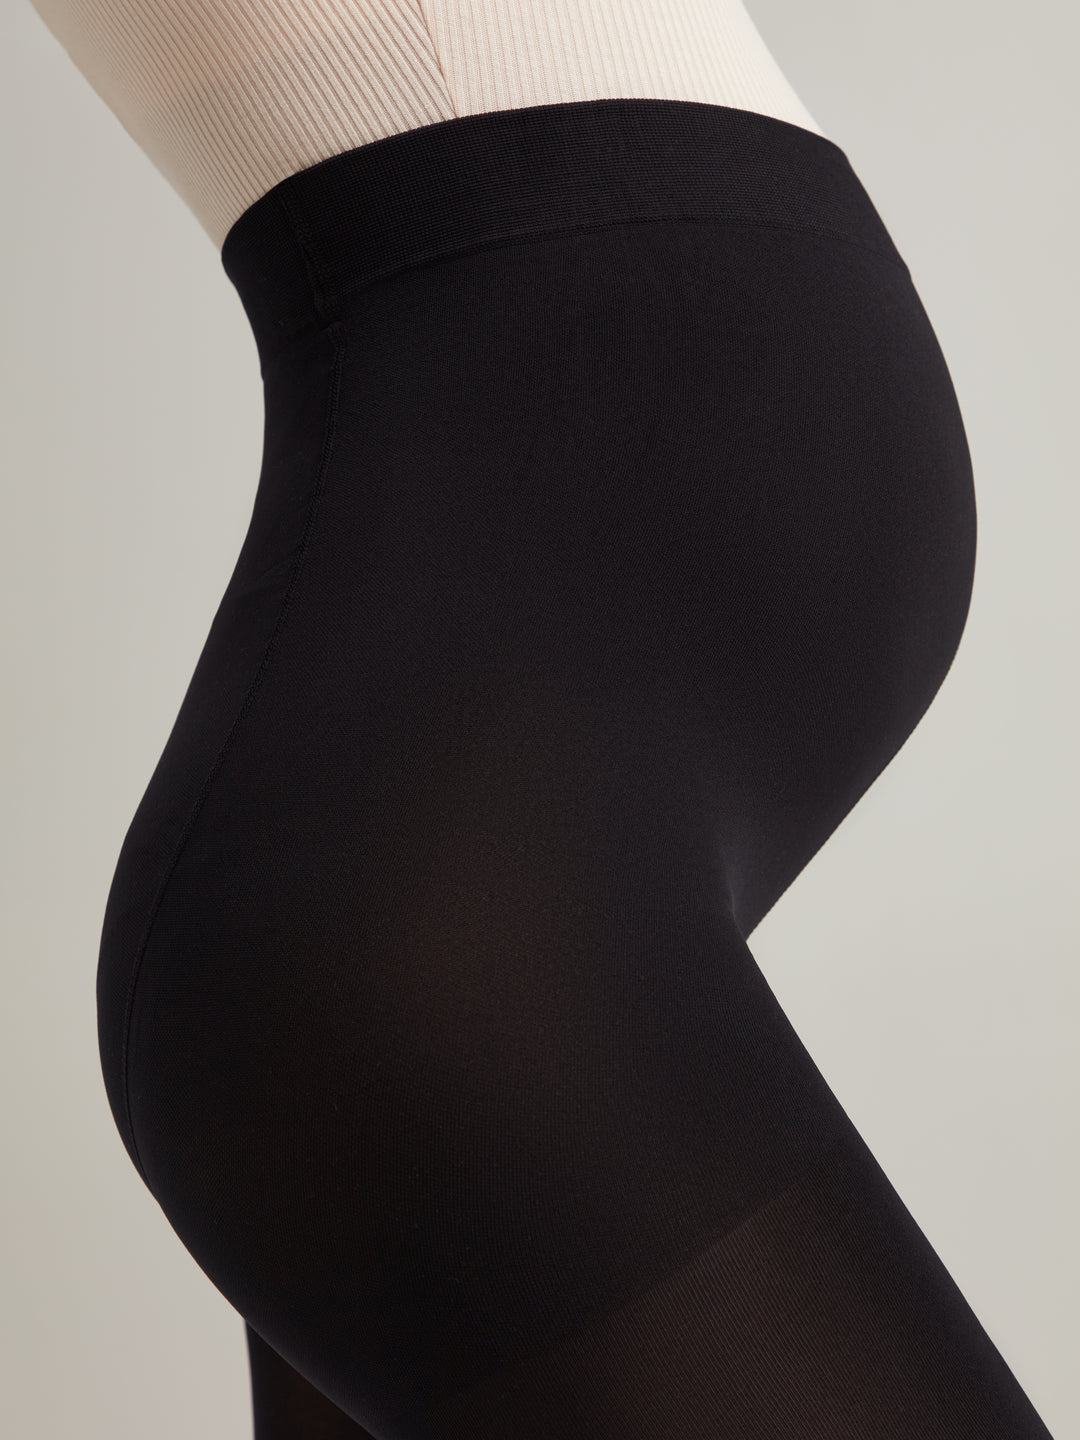 Maternity Tights Conte Amore 60 Den Support Effect Microfiber